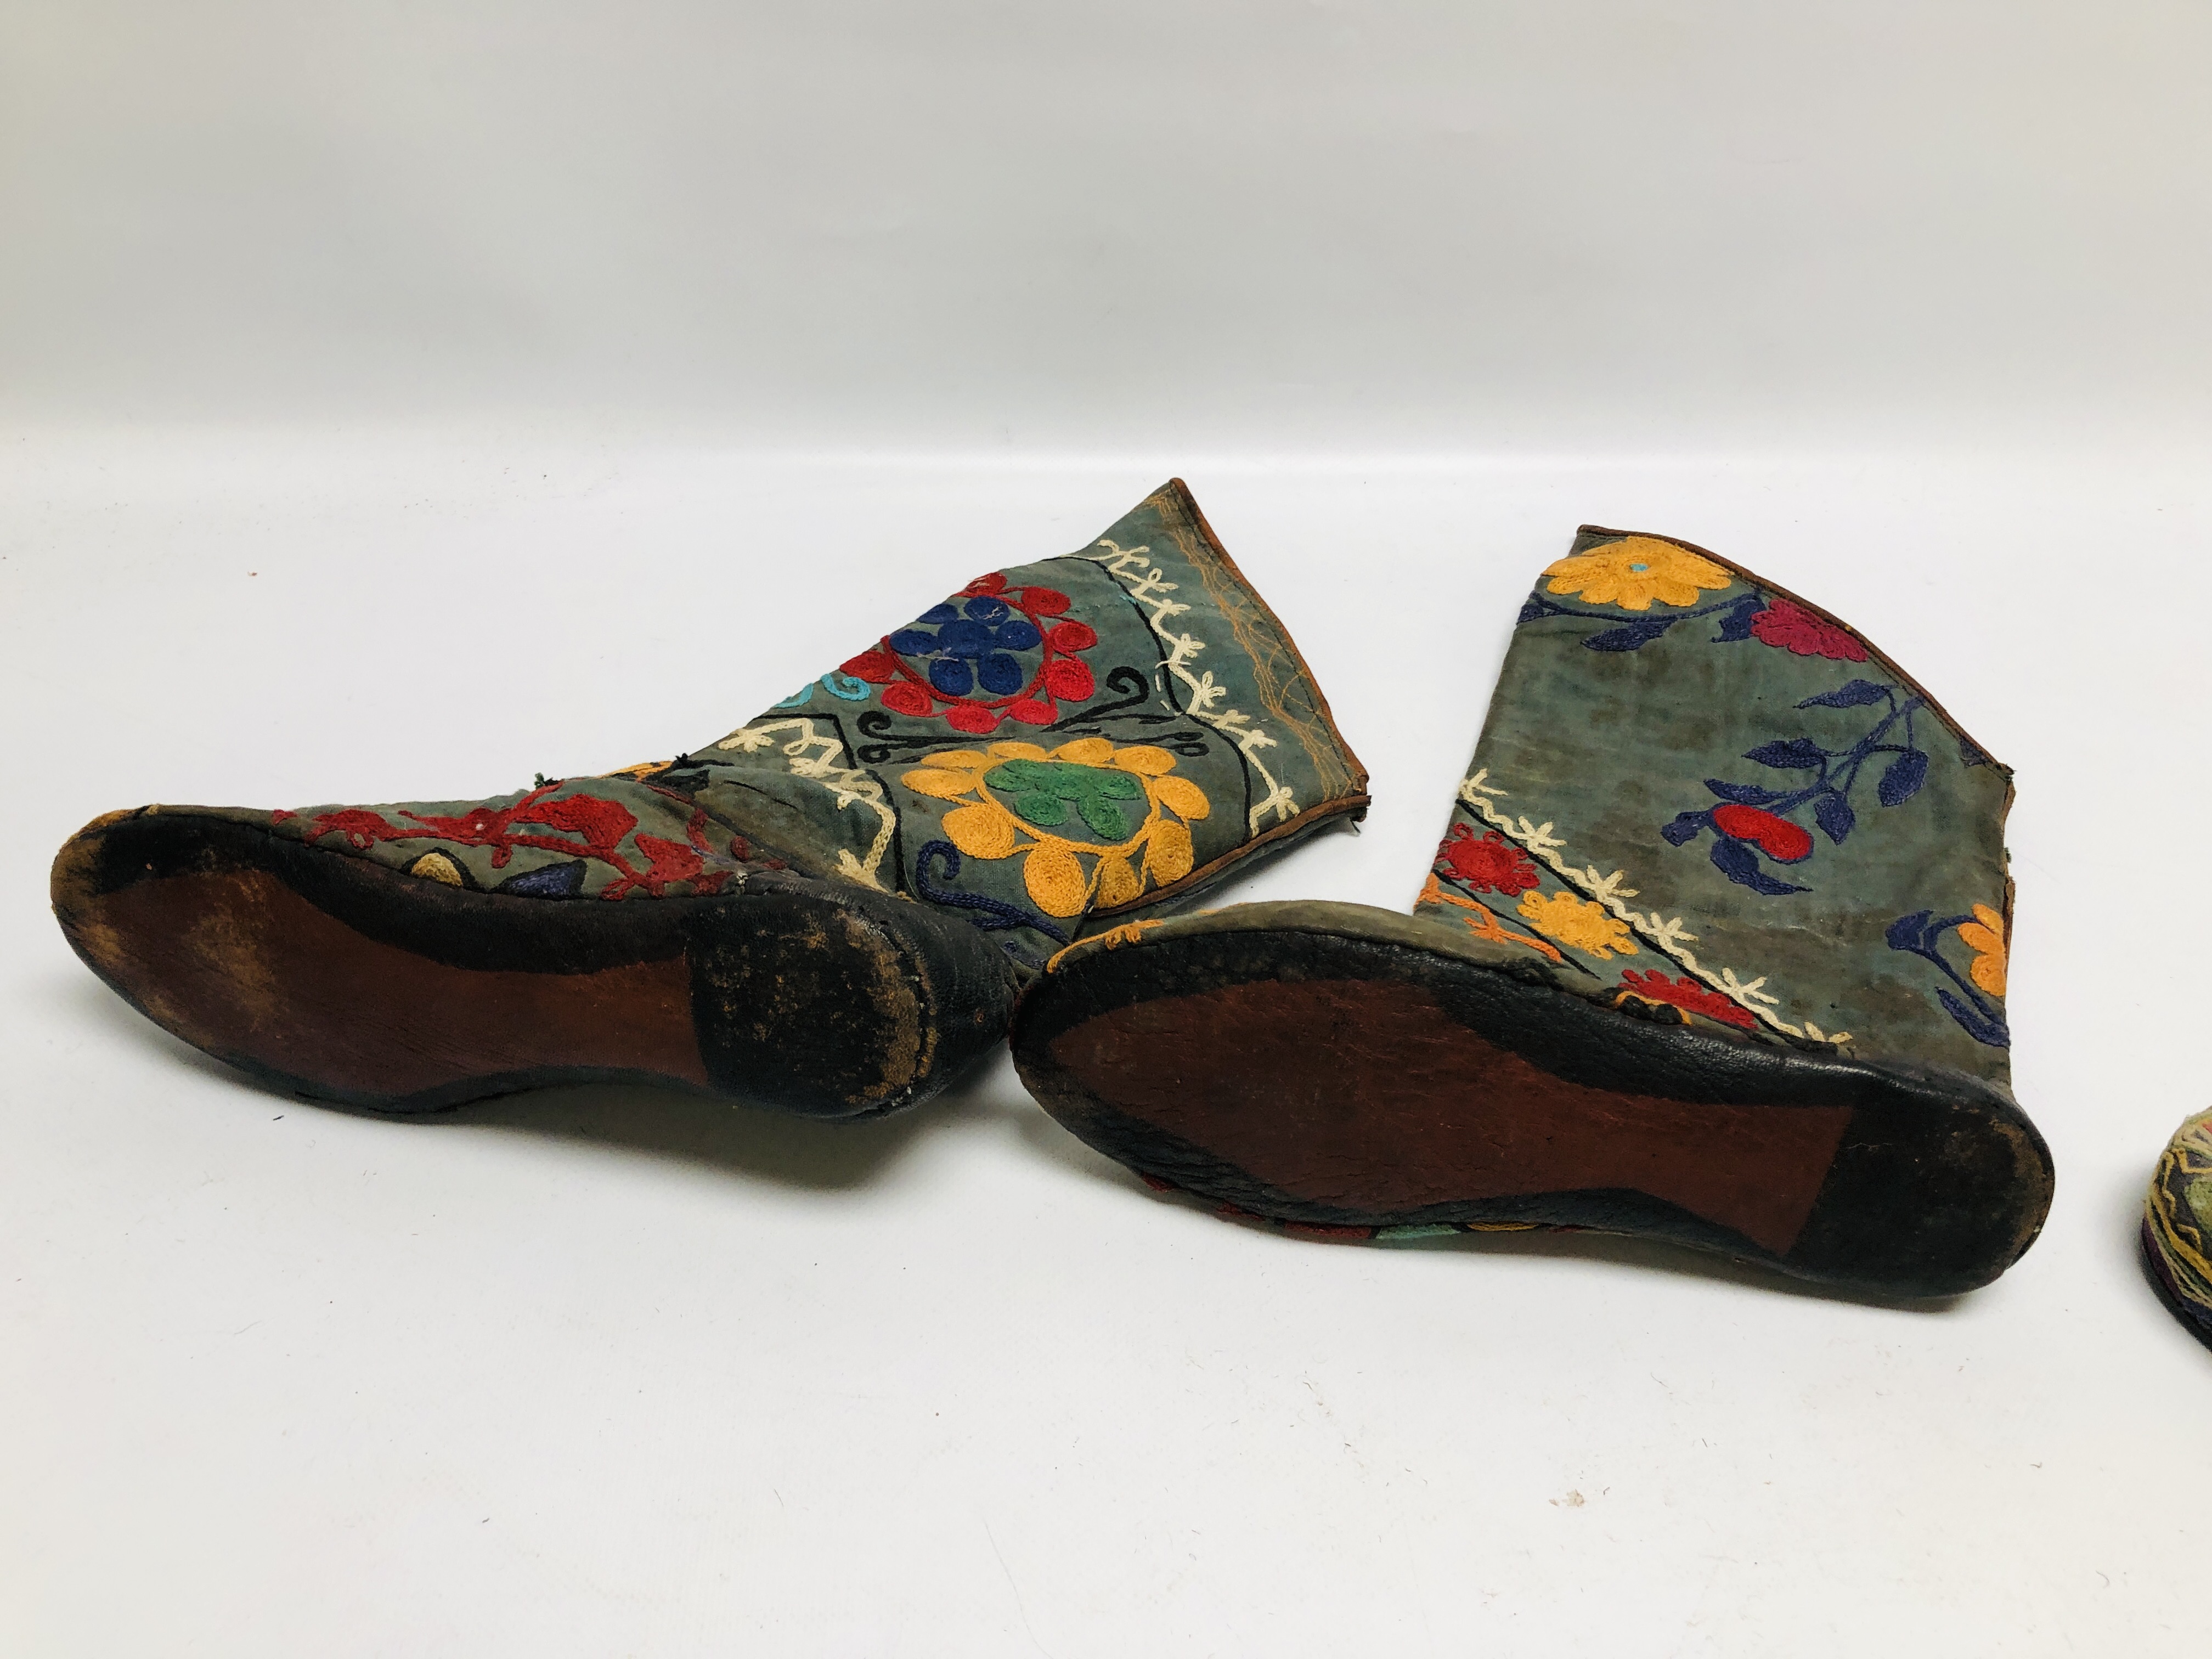 A PAIR OF MID C20TH AFGHAN EMBROIDERED SHOES ALONG WITH A PAIR OF EMBROIDERED BOOTS. - Image 8 of 10